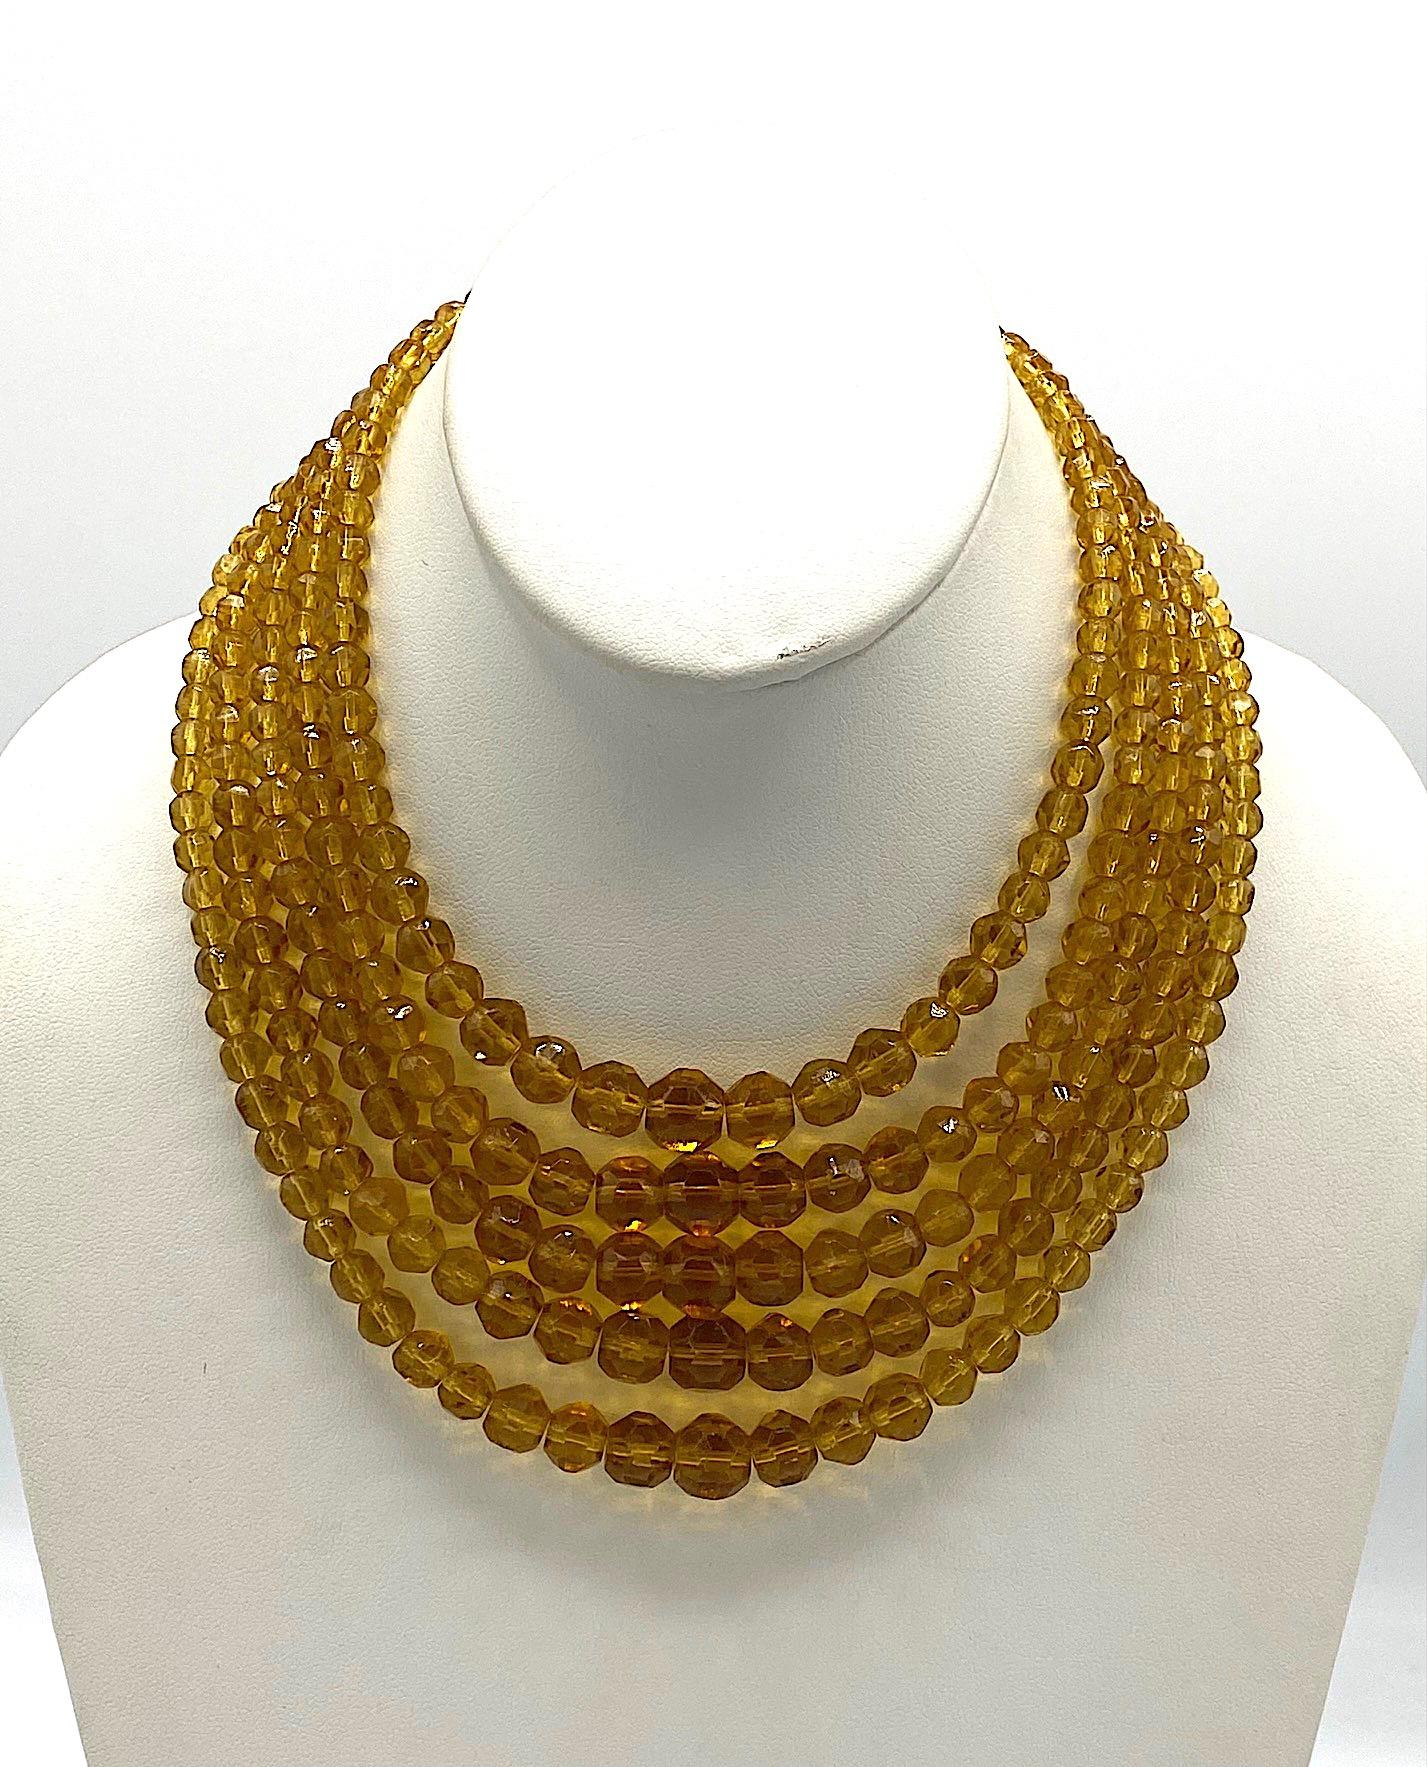 A lovely five strand graduated crystal bead bib necklace made in Italy and from the 1950s. Each of the five strands is comprised of golden light abler color beads from 5 mm to 10 mm in size. The necklace features a large oval push pin clasp 1.13